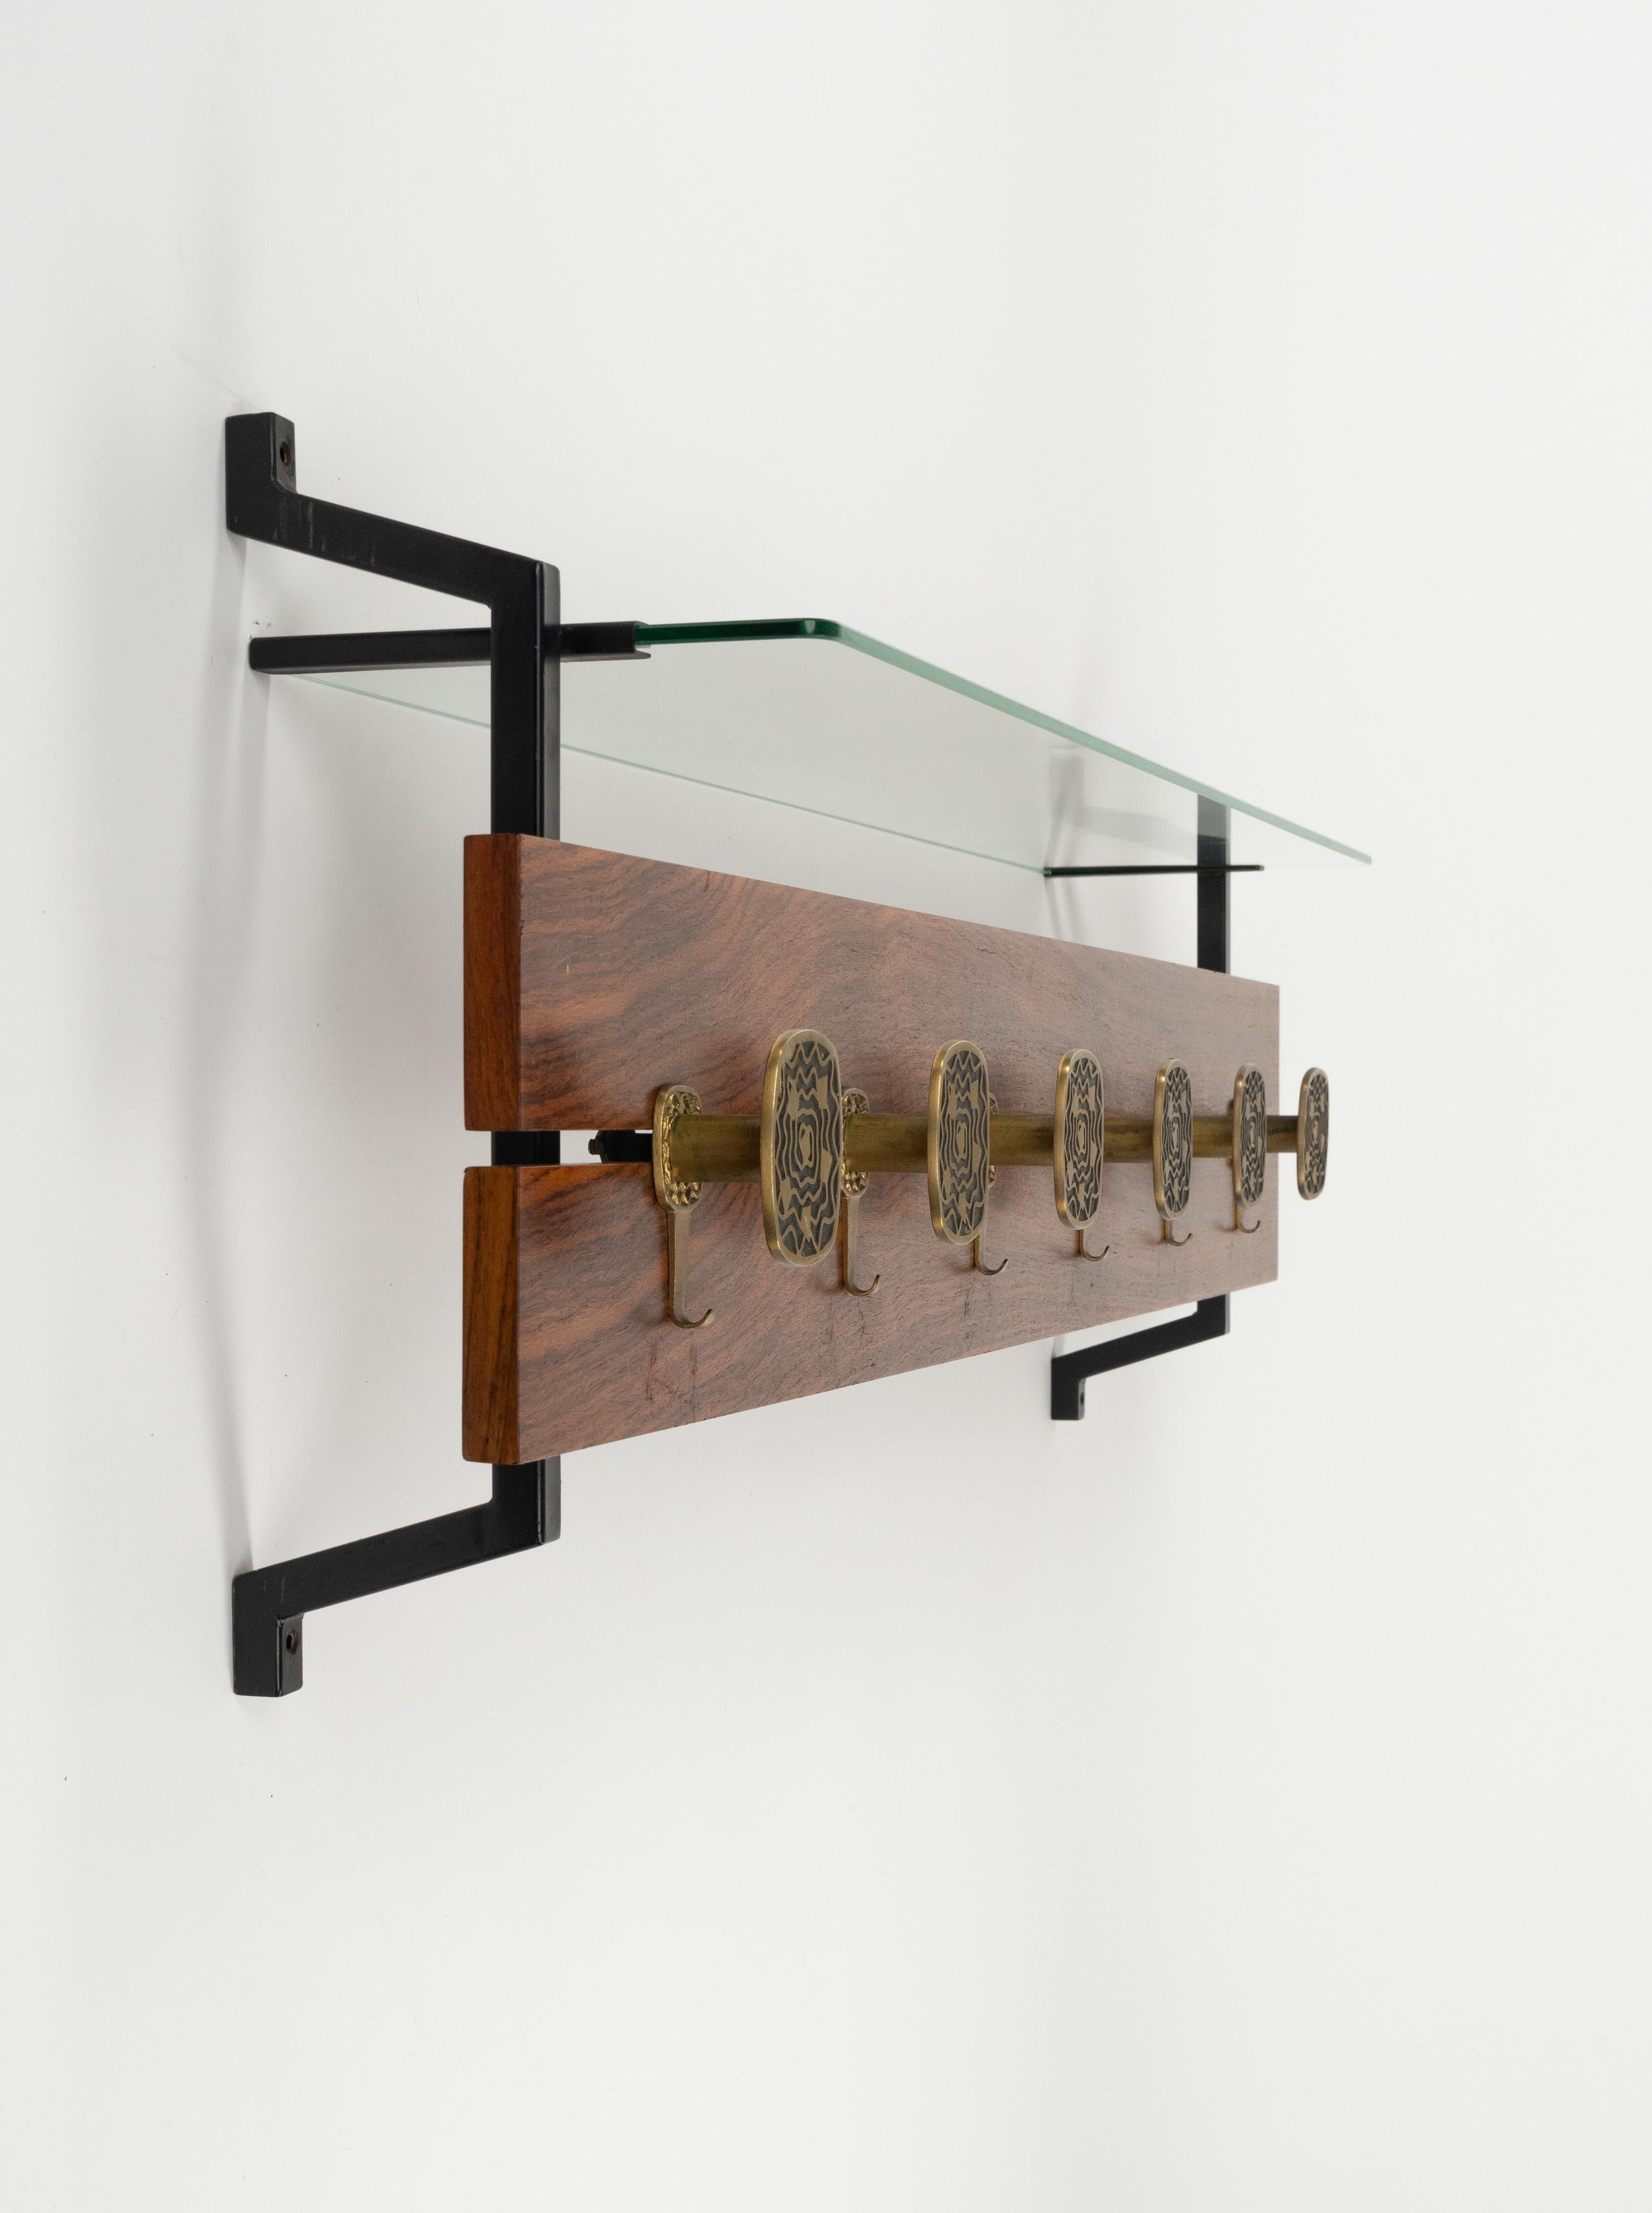 Metal Midcentury Wood, Glass and Brass Coat Rack Herta Baller Style, Italy 1970s For Sale